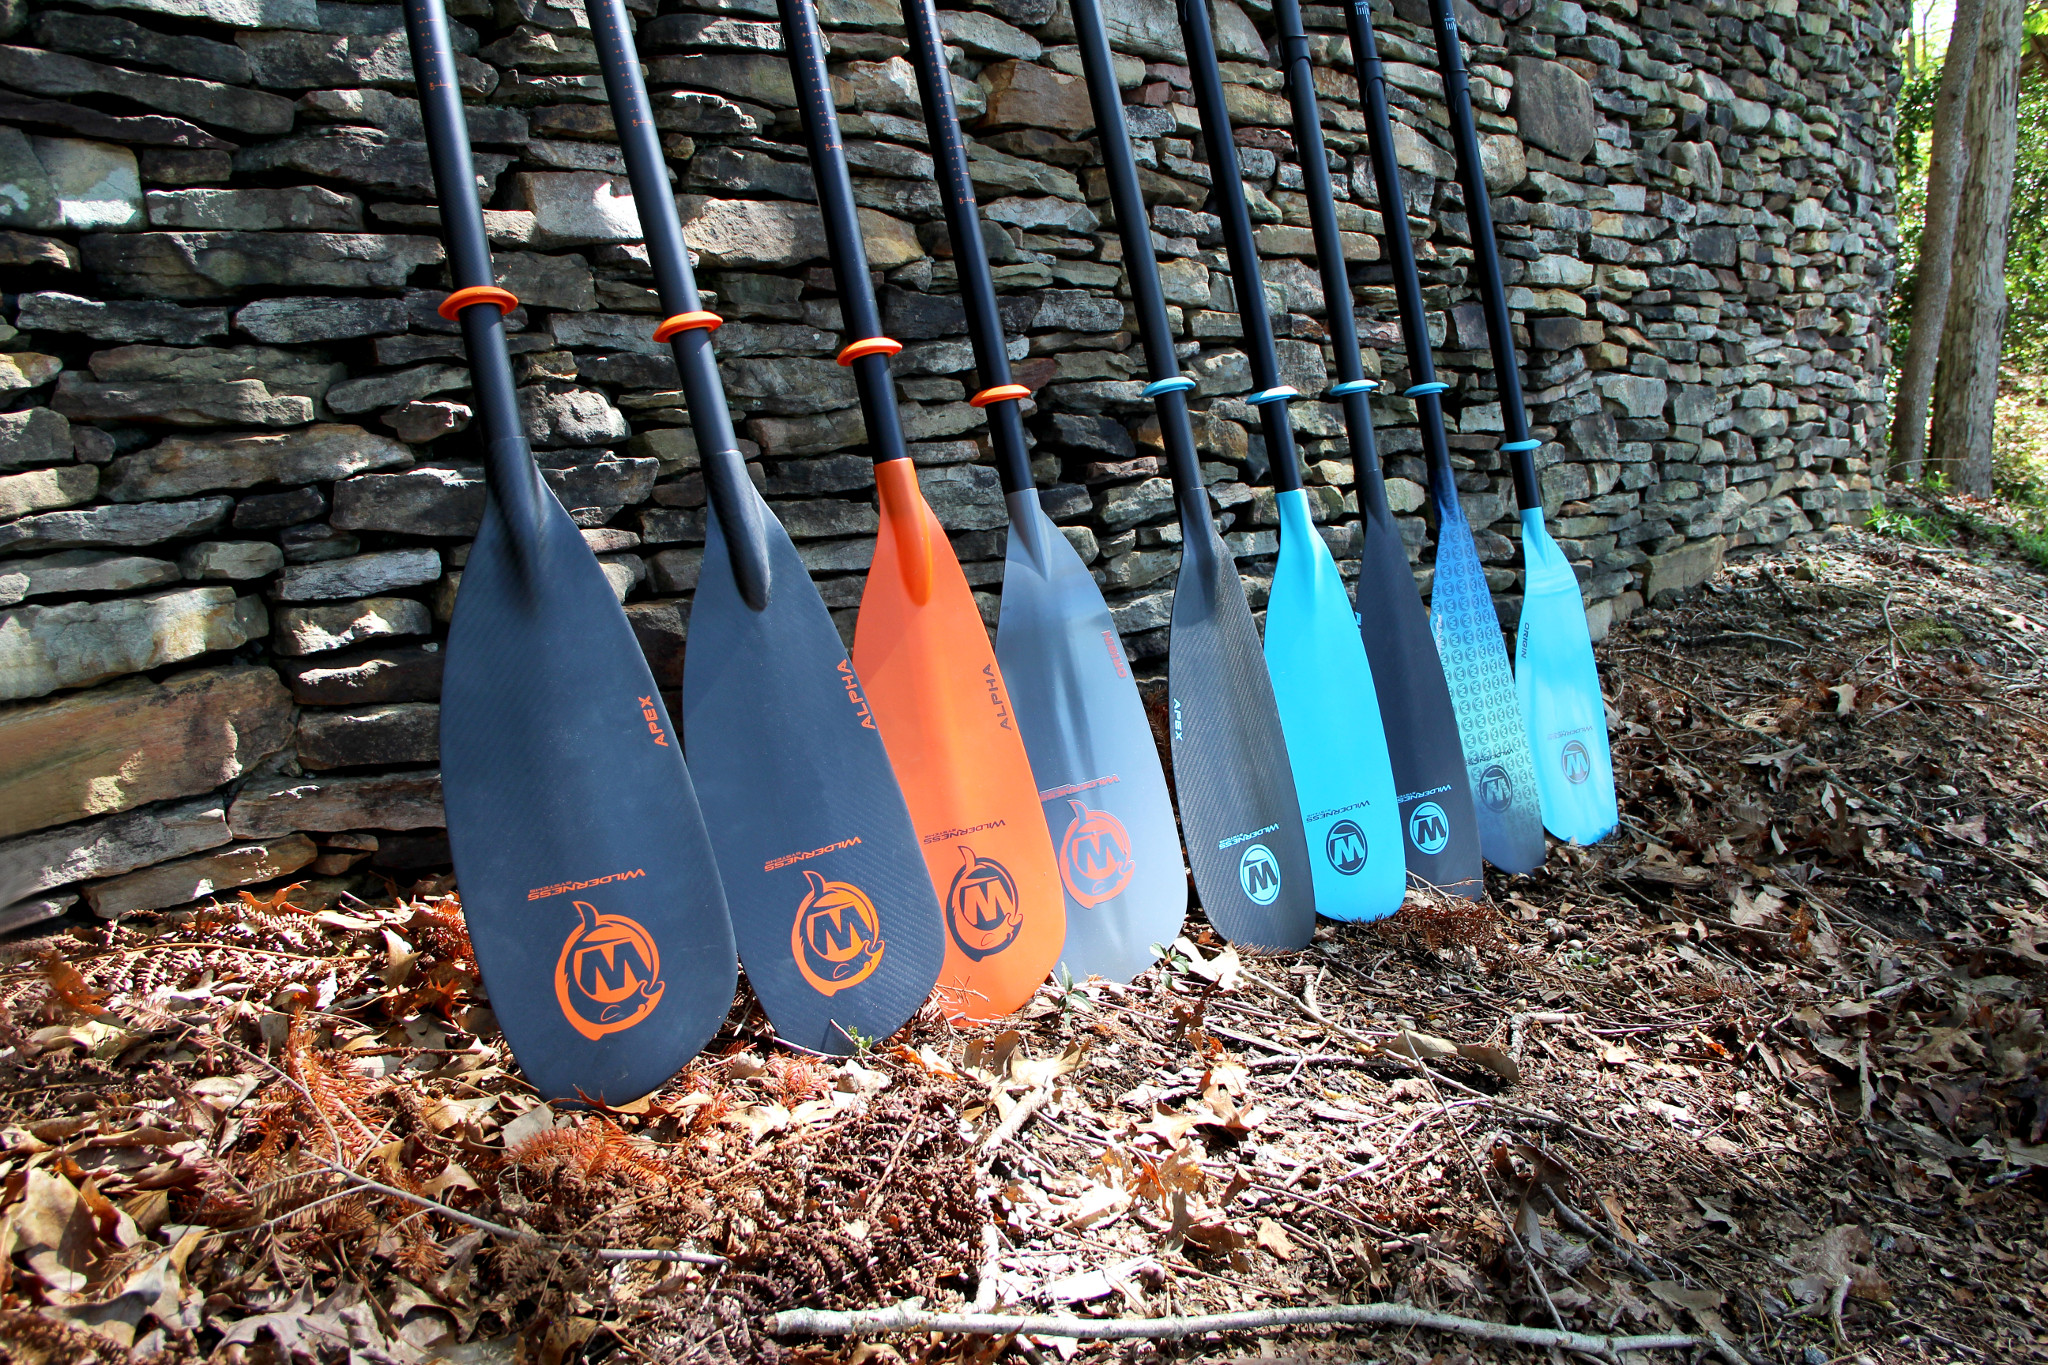 Kayak Gear and Accessories: Everything You Need To Go Kayaking